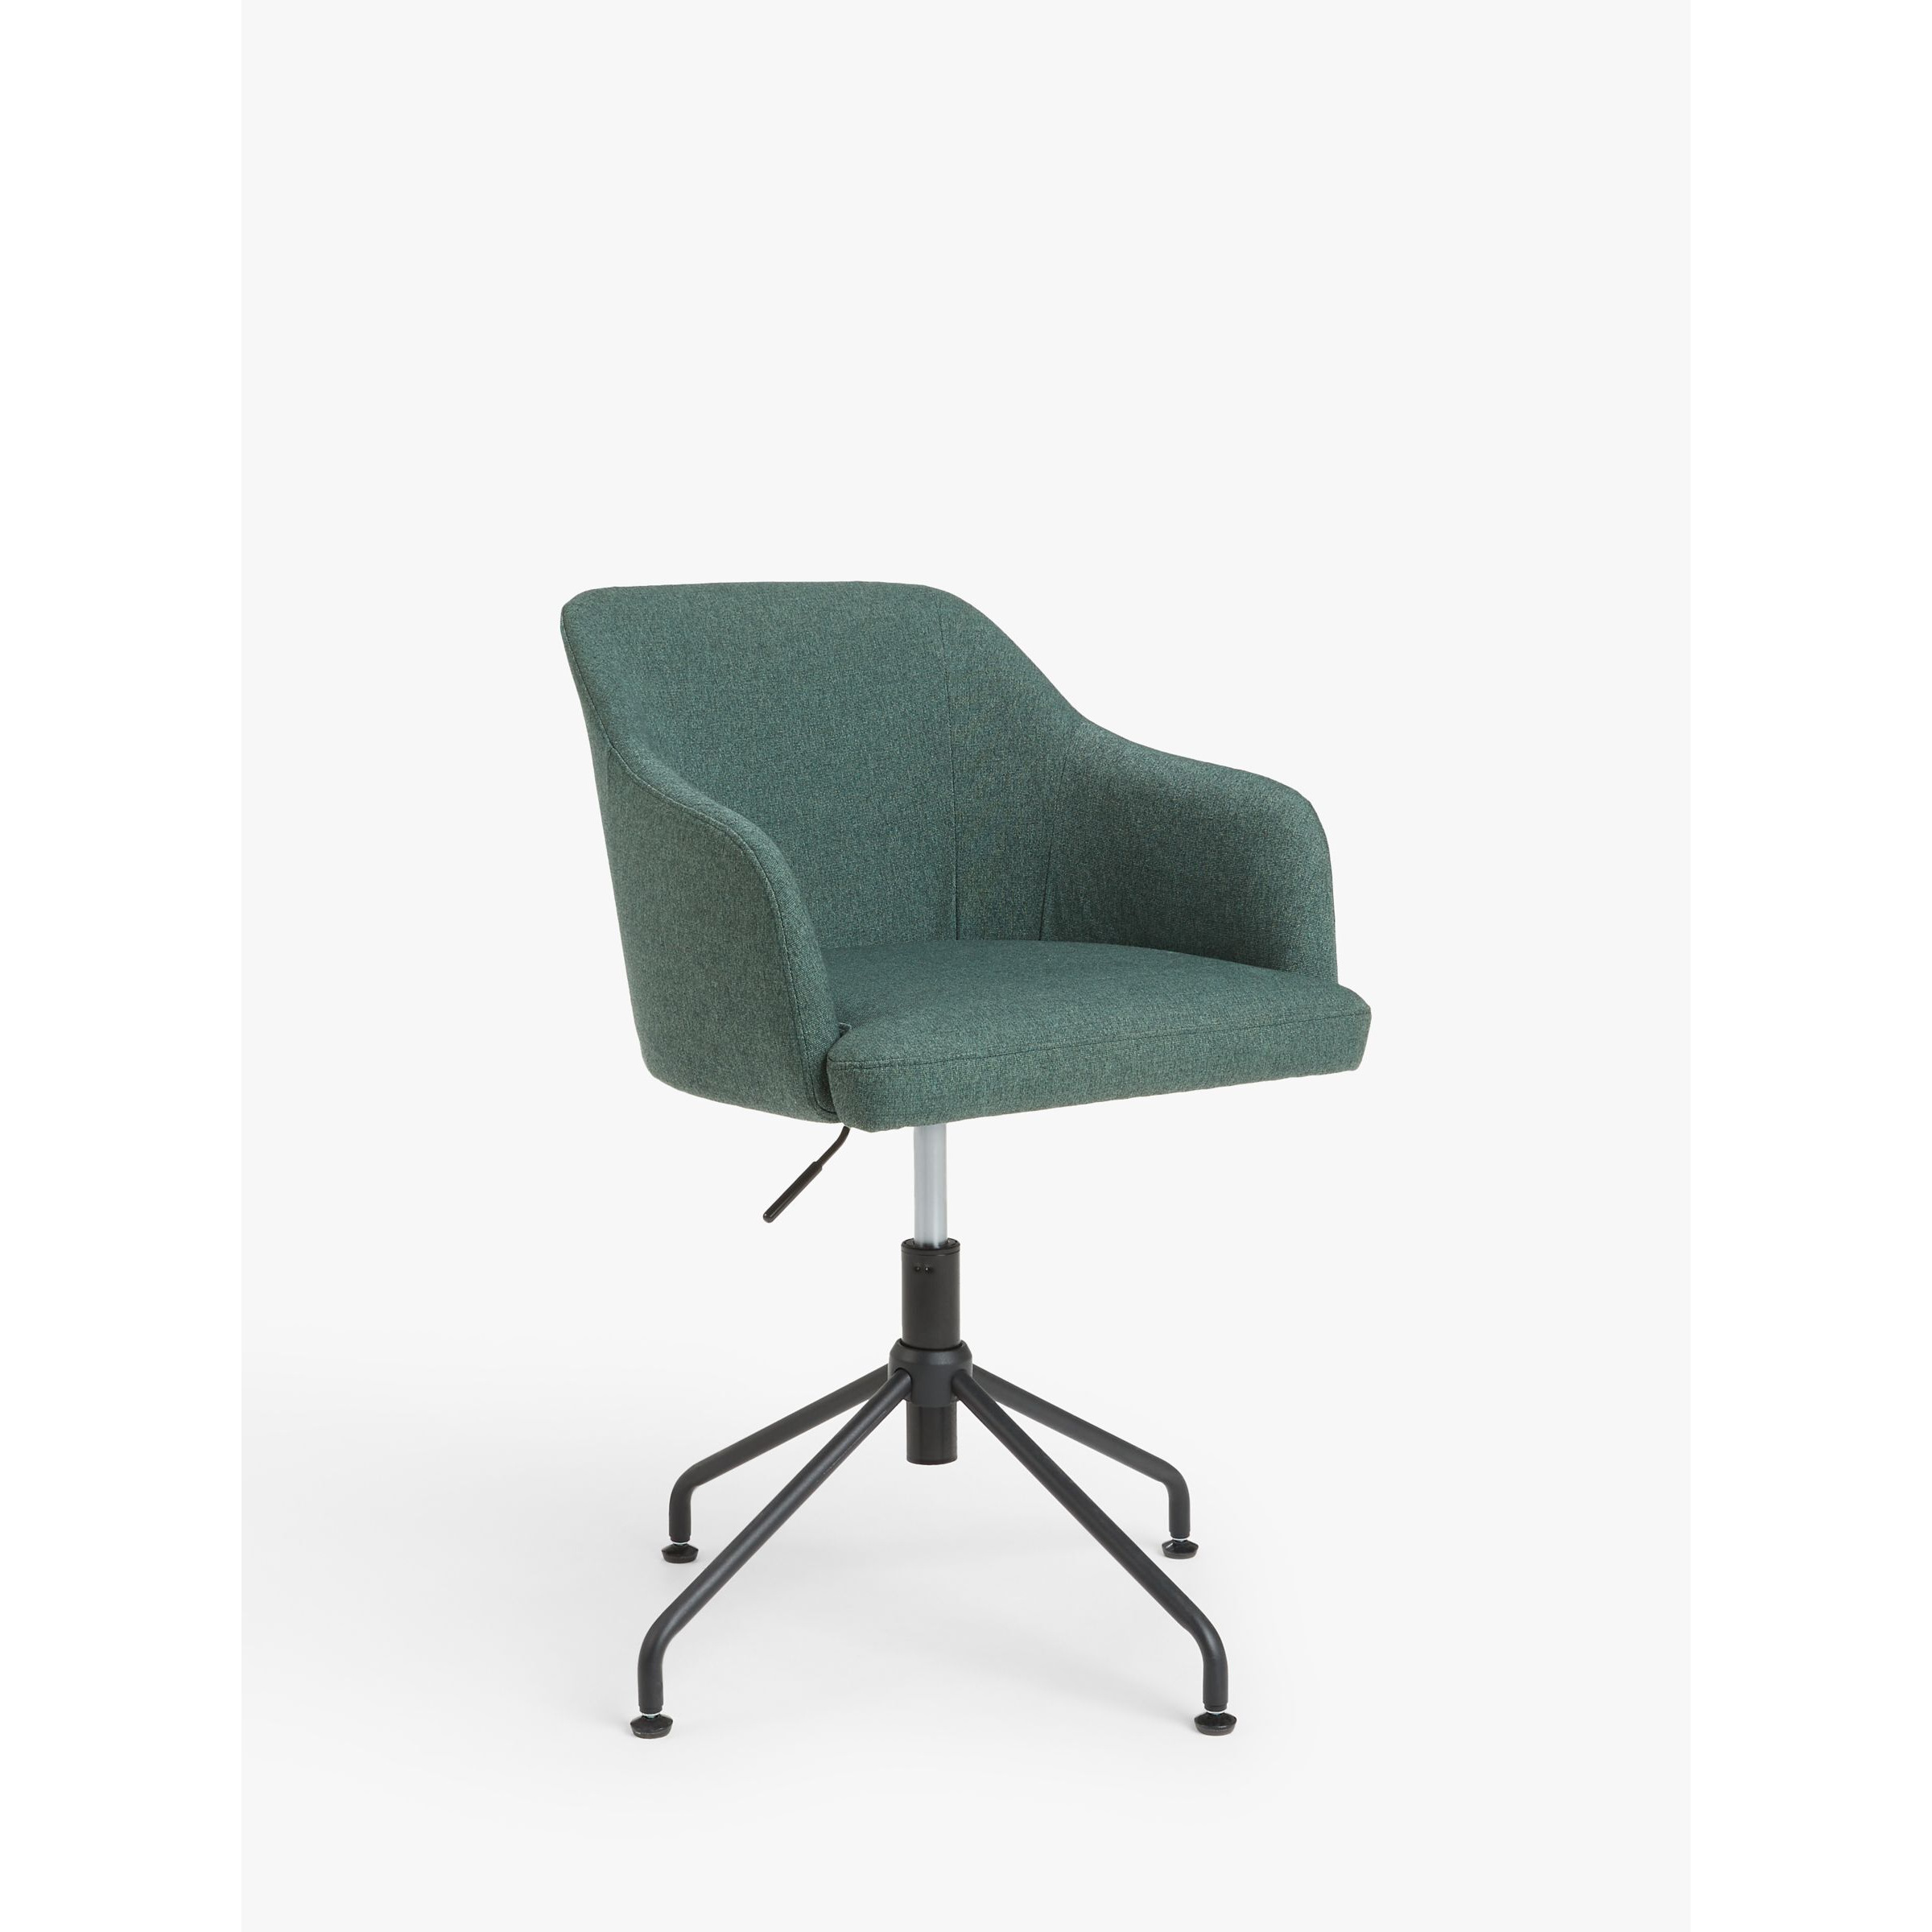 John Lewis ANYDAY Tub Office Chair, Moss Green - image 1